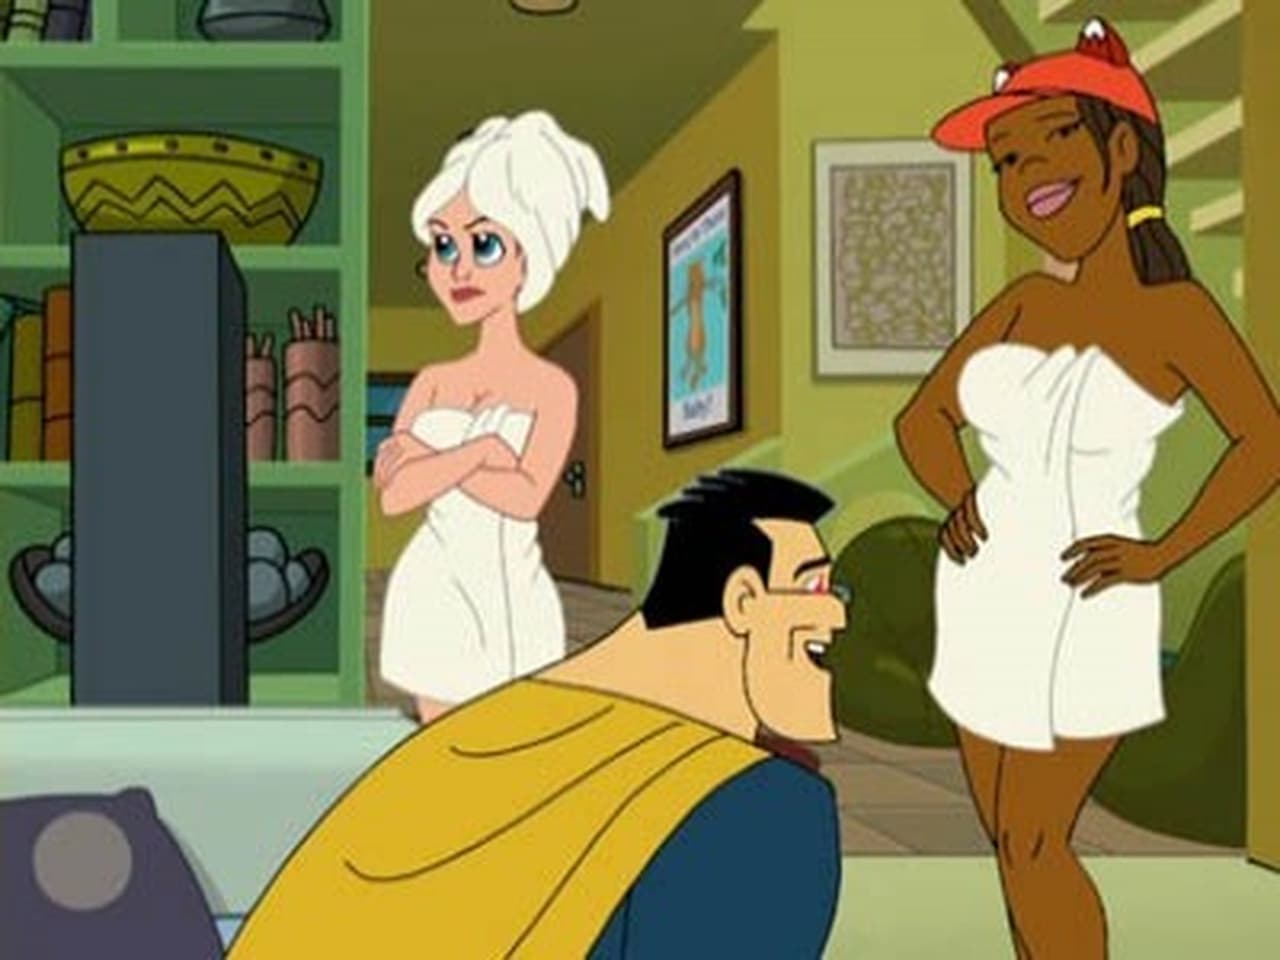 Drawn Together - Season 2 Episode 8 : Terms of Endearment